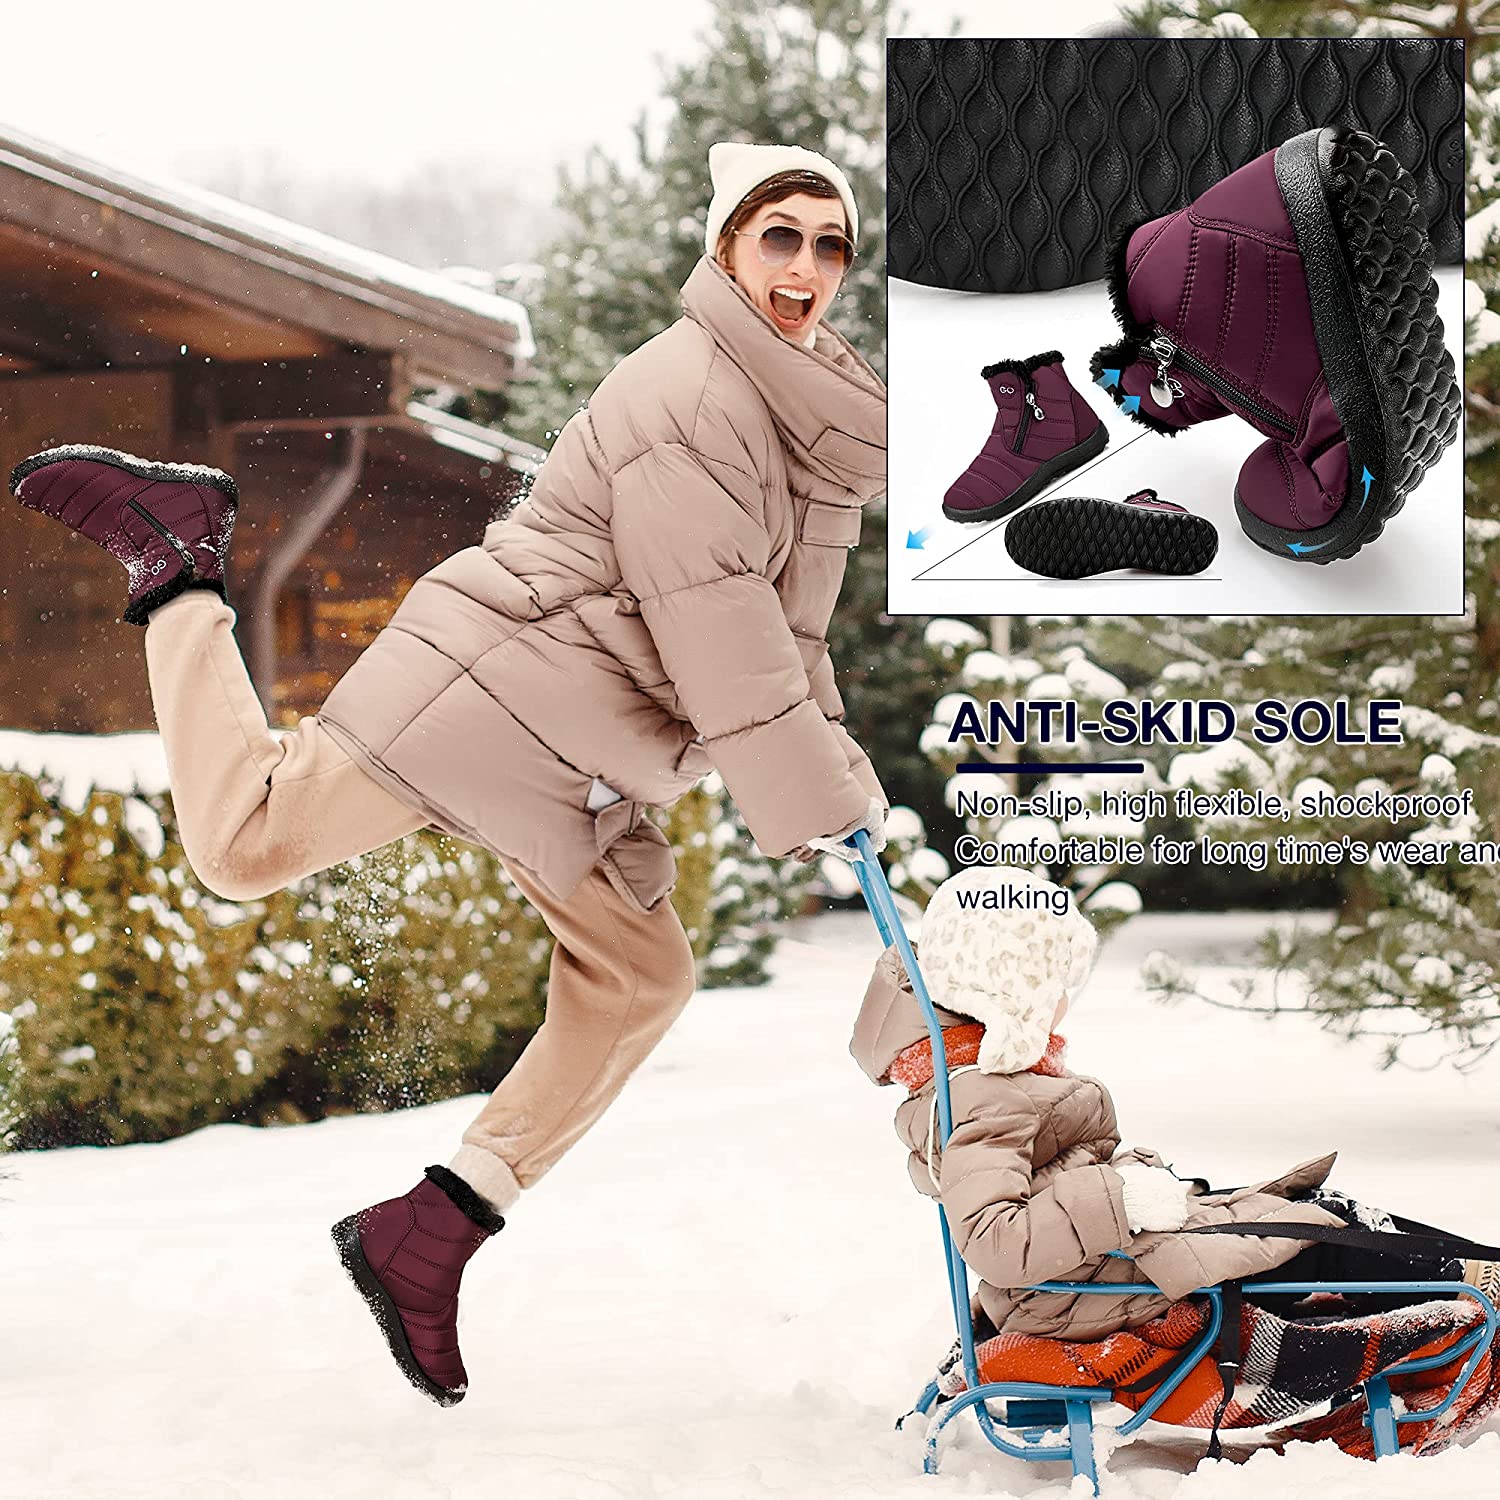 Womens Snow Boots Waterproof Ankle Boots Comfortable Keep Warm Winter Shoes for Women - image 4 of 8